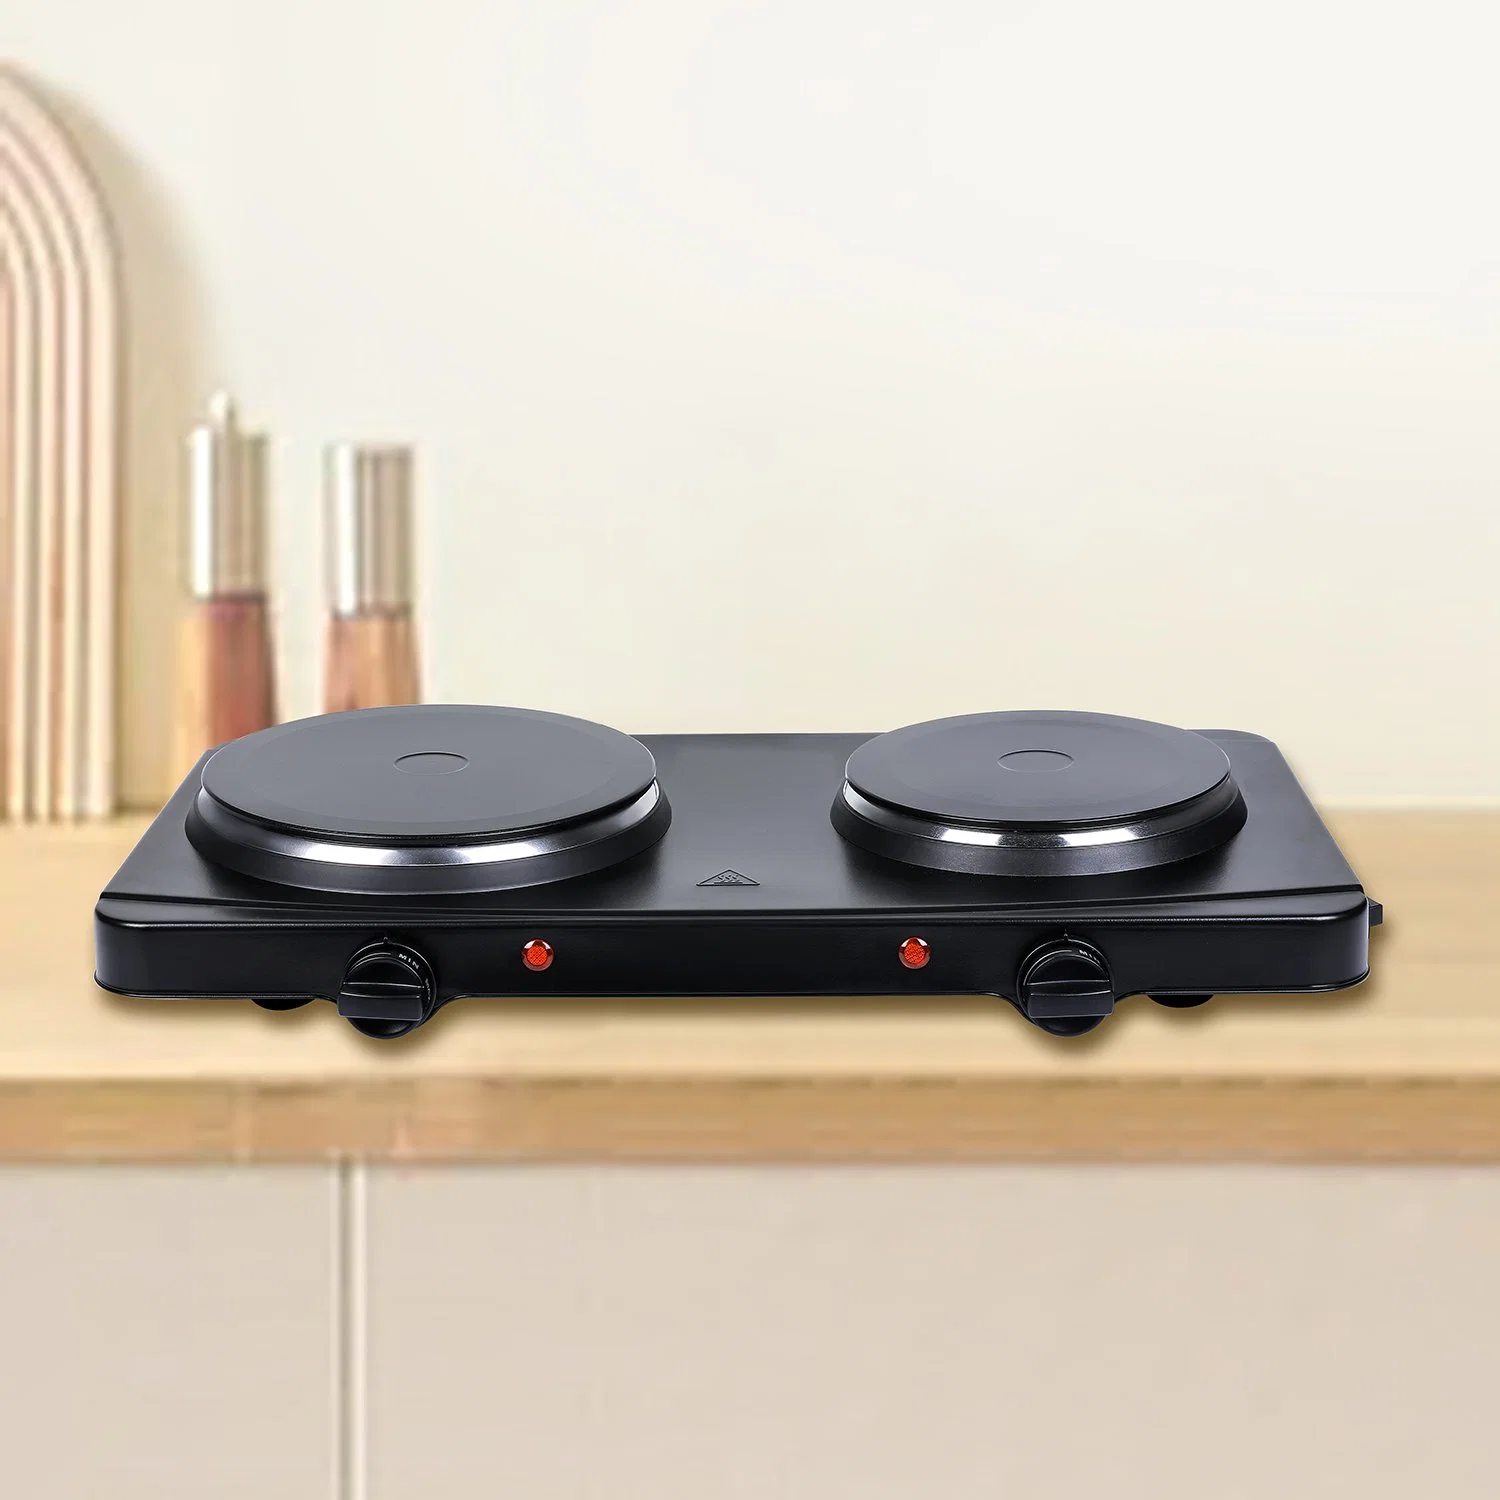 Built in Electric Hotplate Hob Kitchen Cooktop Electric Cooking Stove Infrared Burner